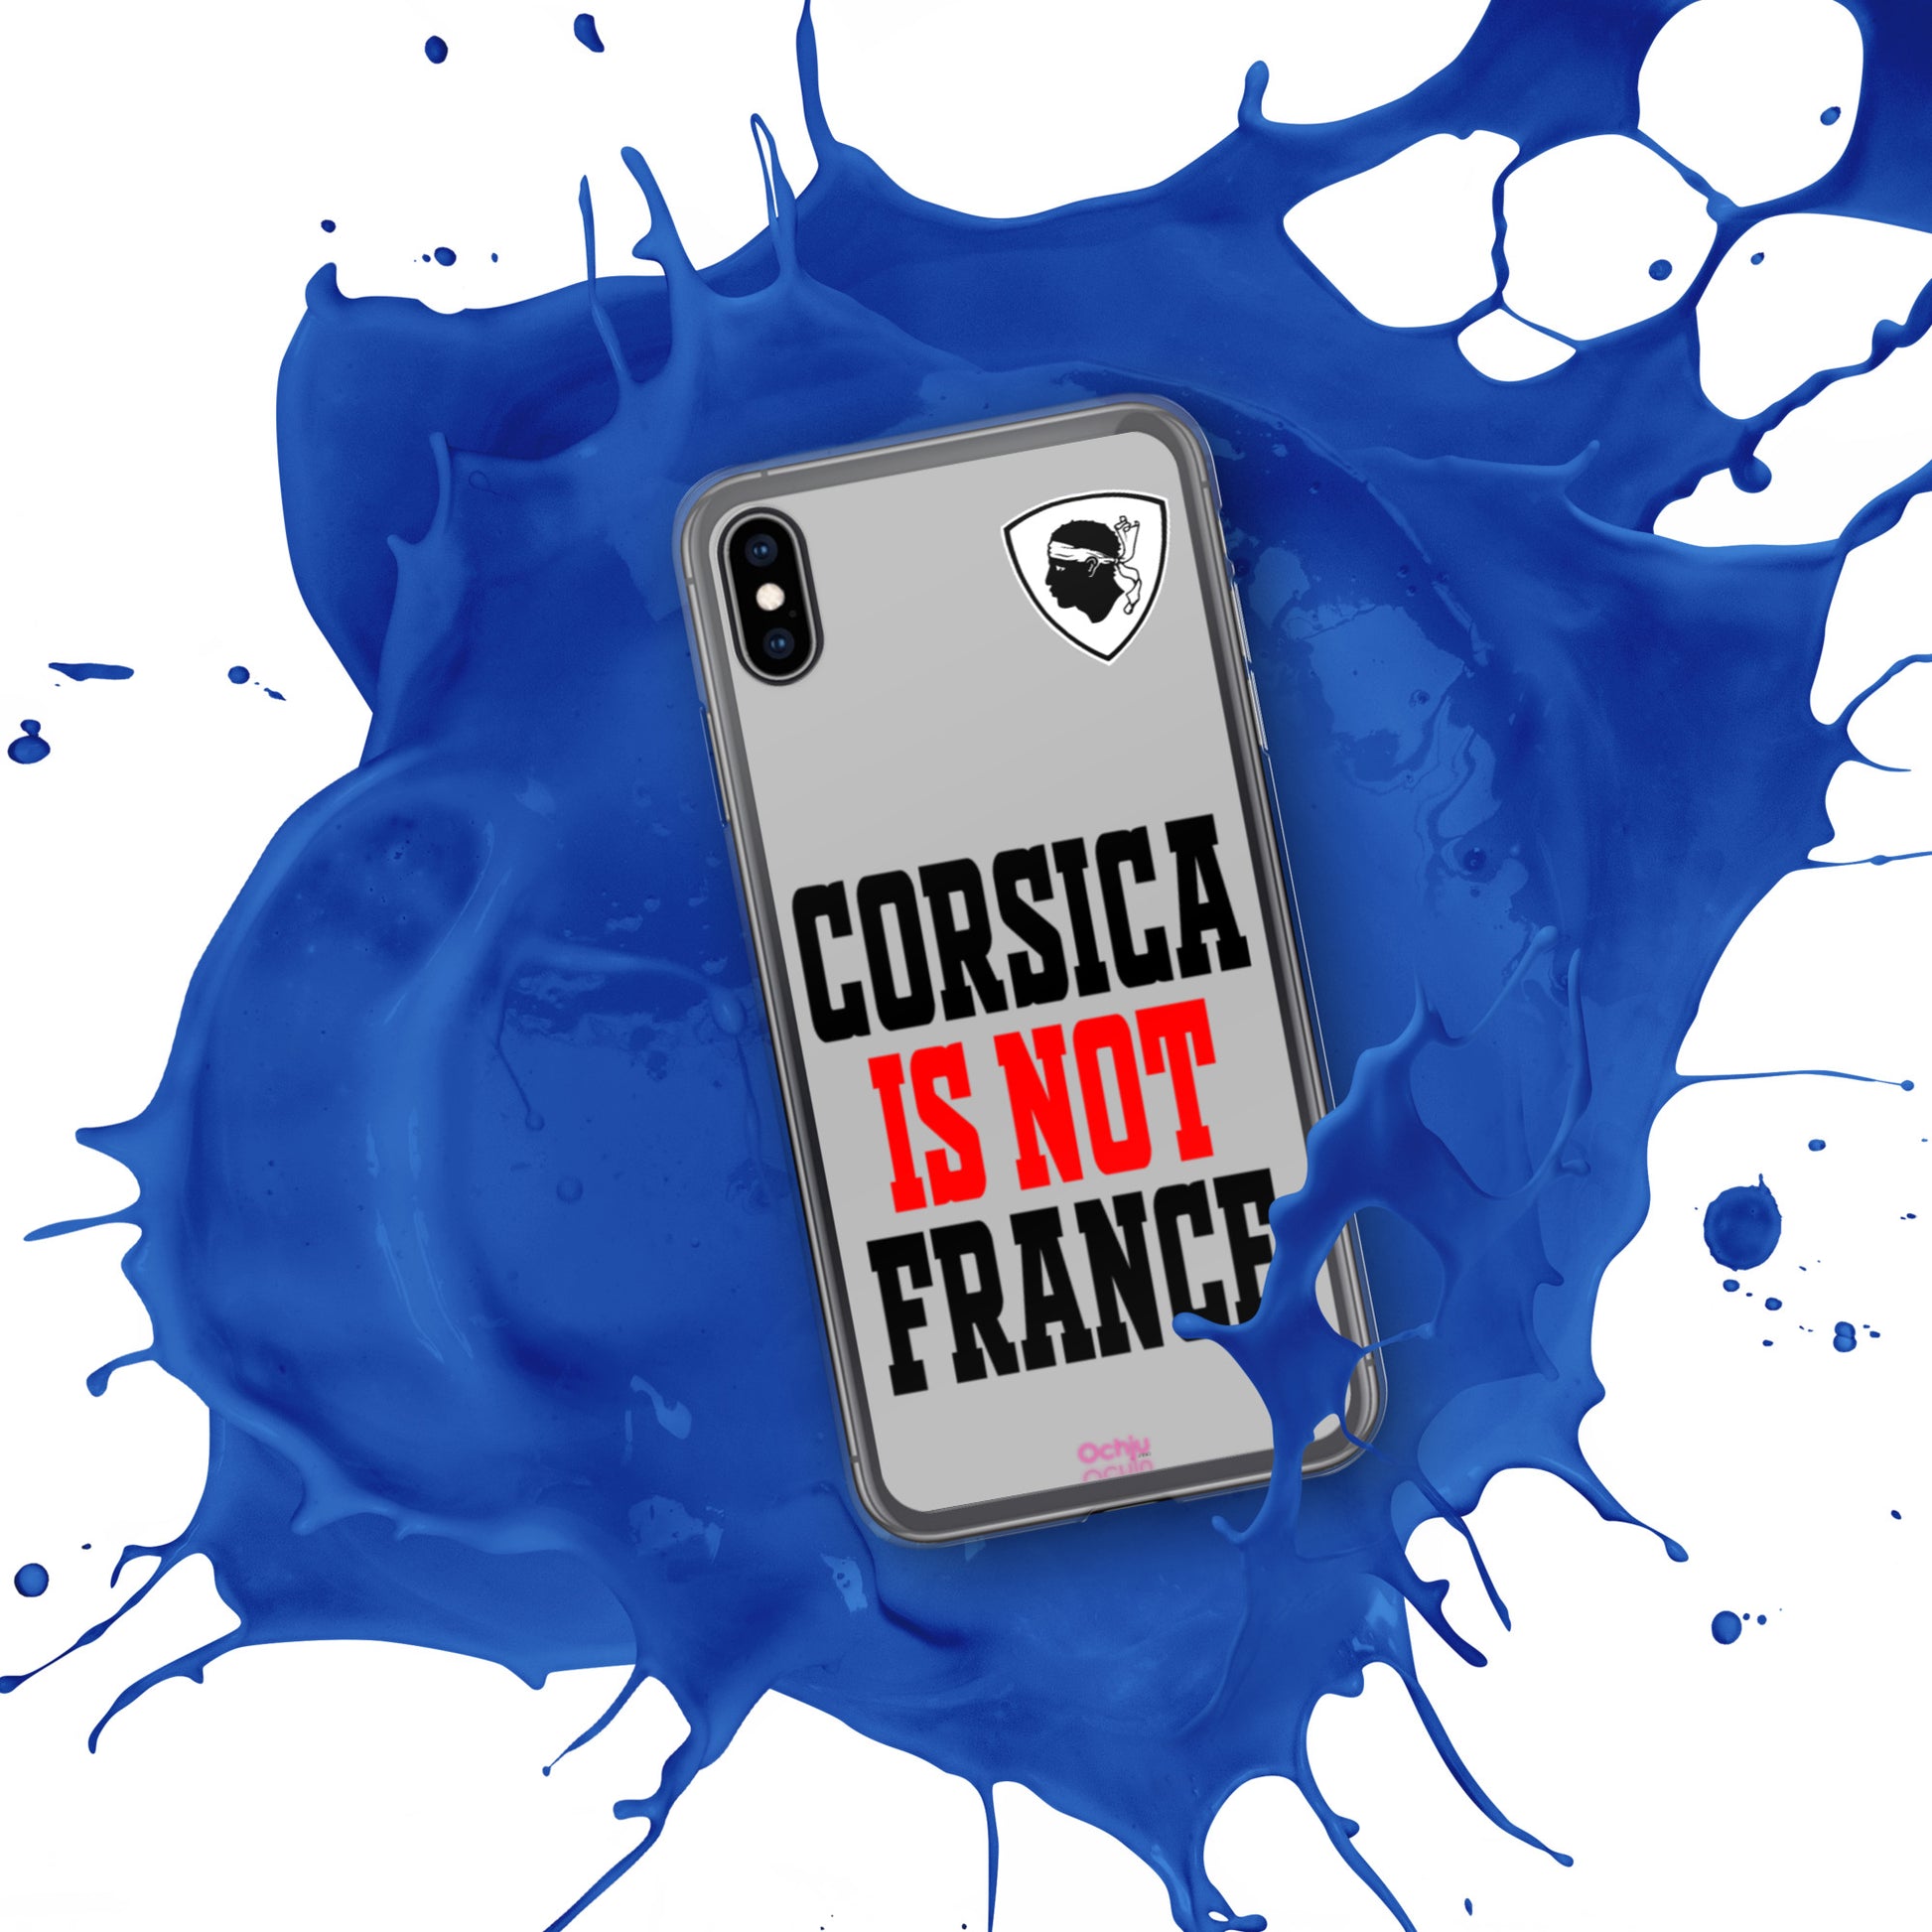 Coque pour iPhone Corsica is not France - Ochju Ochju iPhone XS Max Ochju Coque pour iPhone Corsica is not France